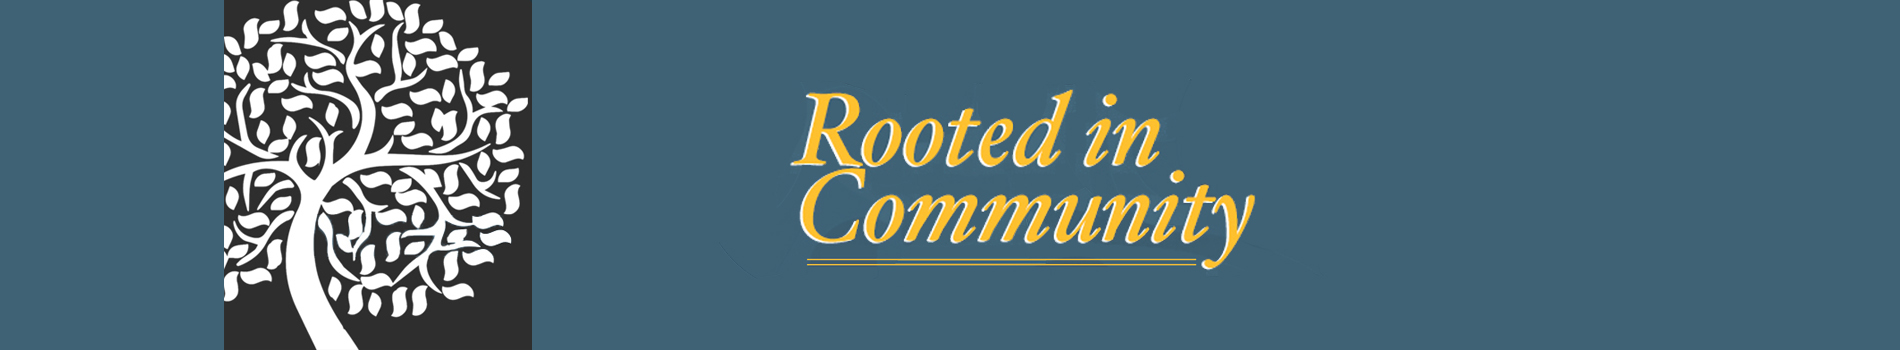 Image of a tree, text is "Rooted in Community"